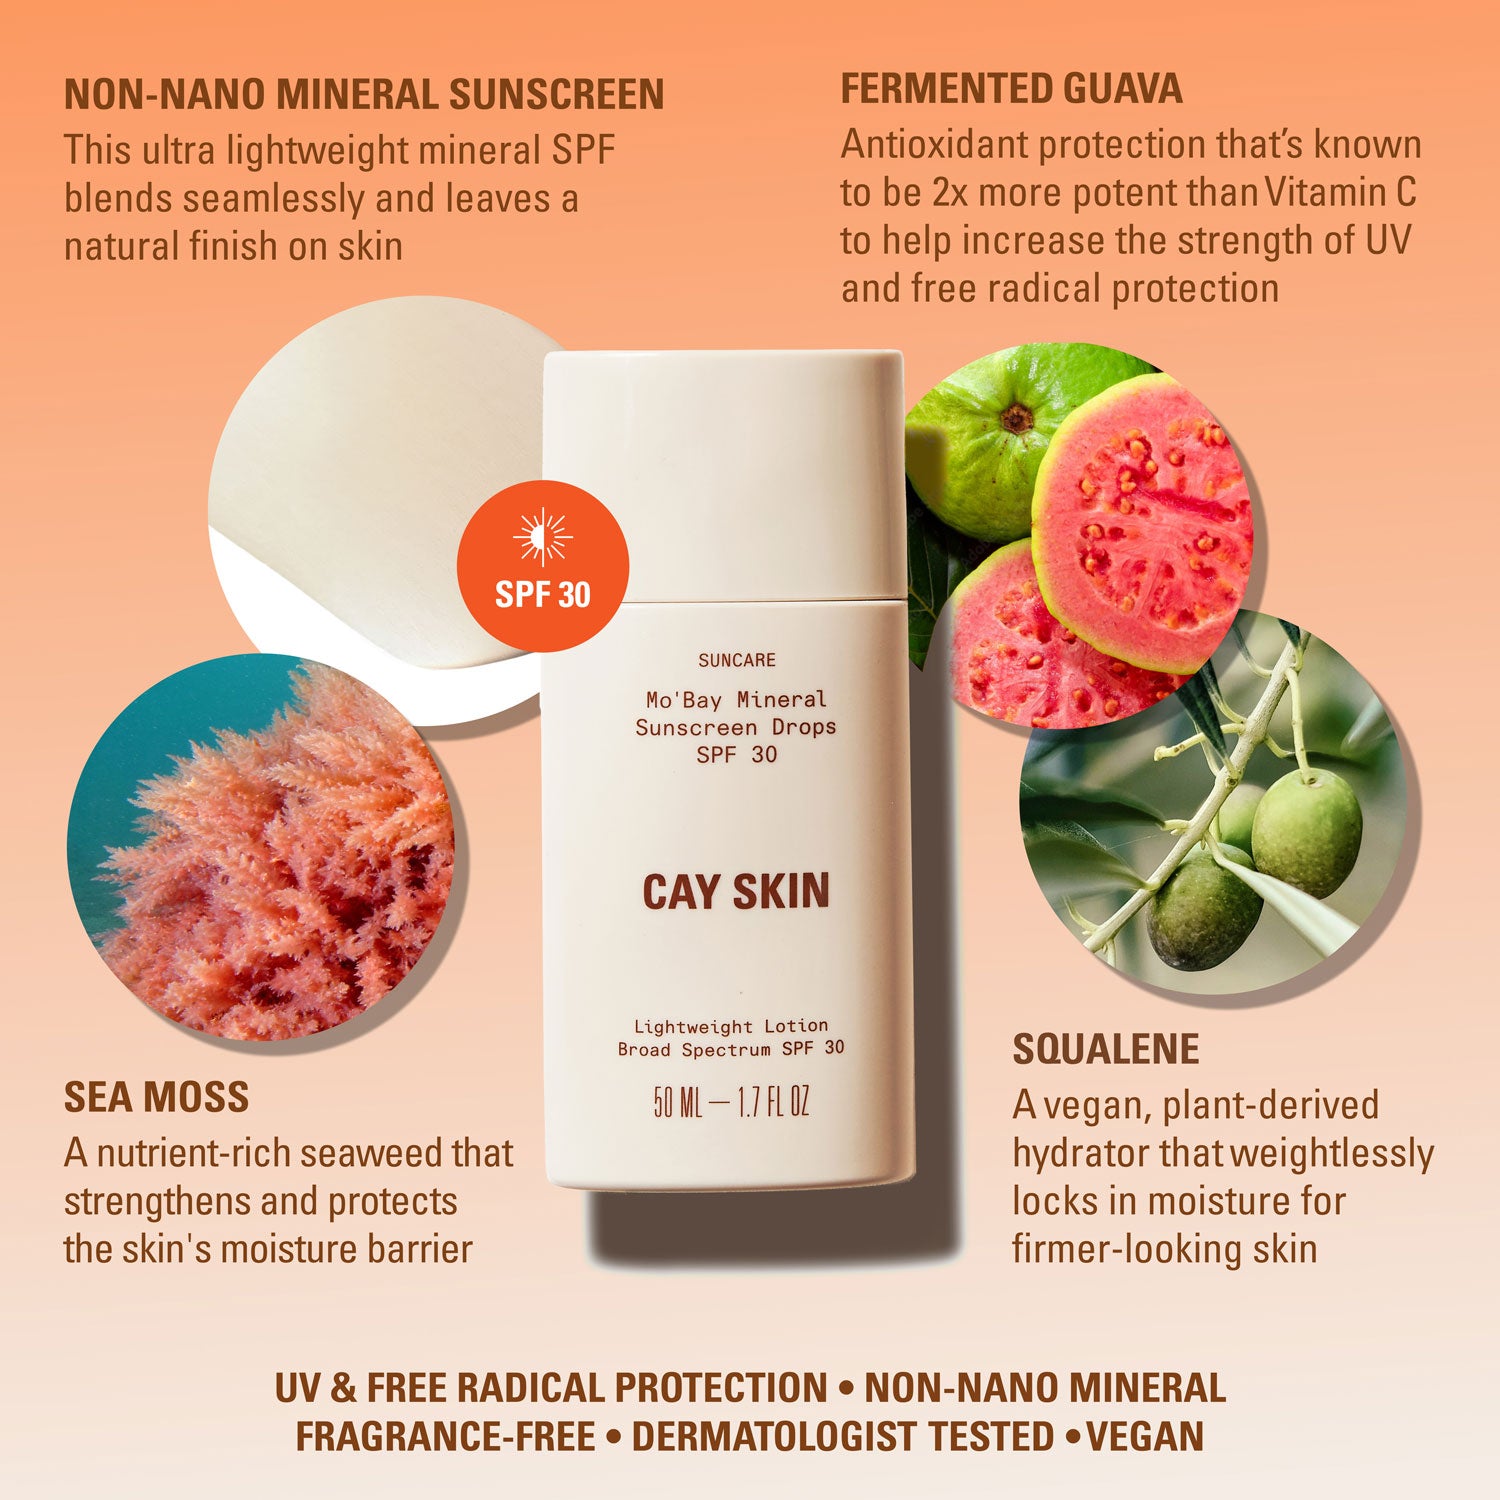 Infographic for Cay Skin Mo’Bay Mineral Sheer-Melt Sunscreen Drops SPF 30 with Squalane